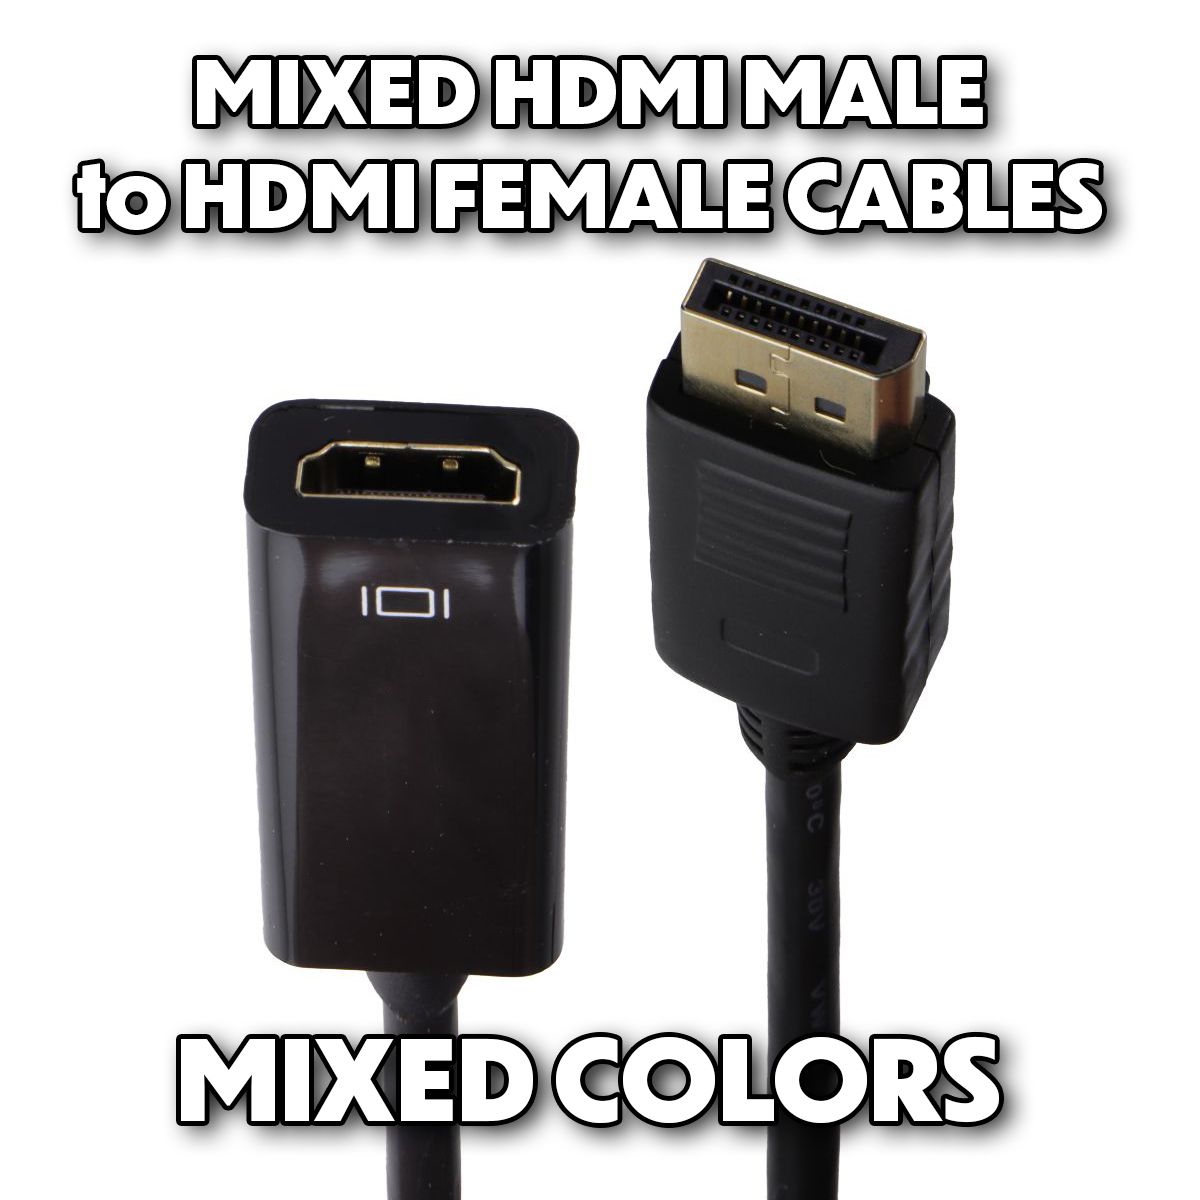 Mixed & Generic DP Displayport to HDMI Female Cable Adapters - Mixed Color/Style